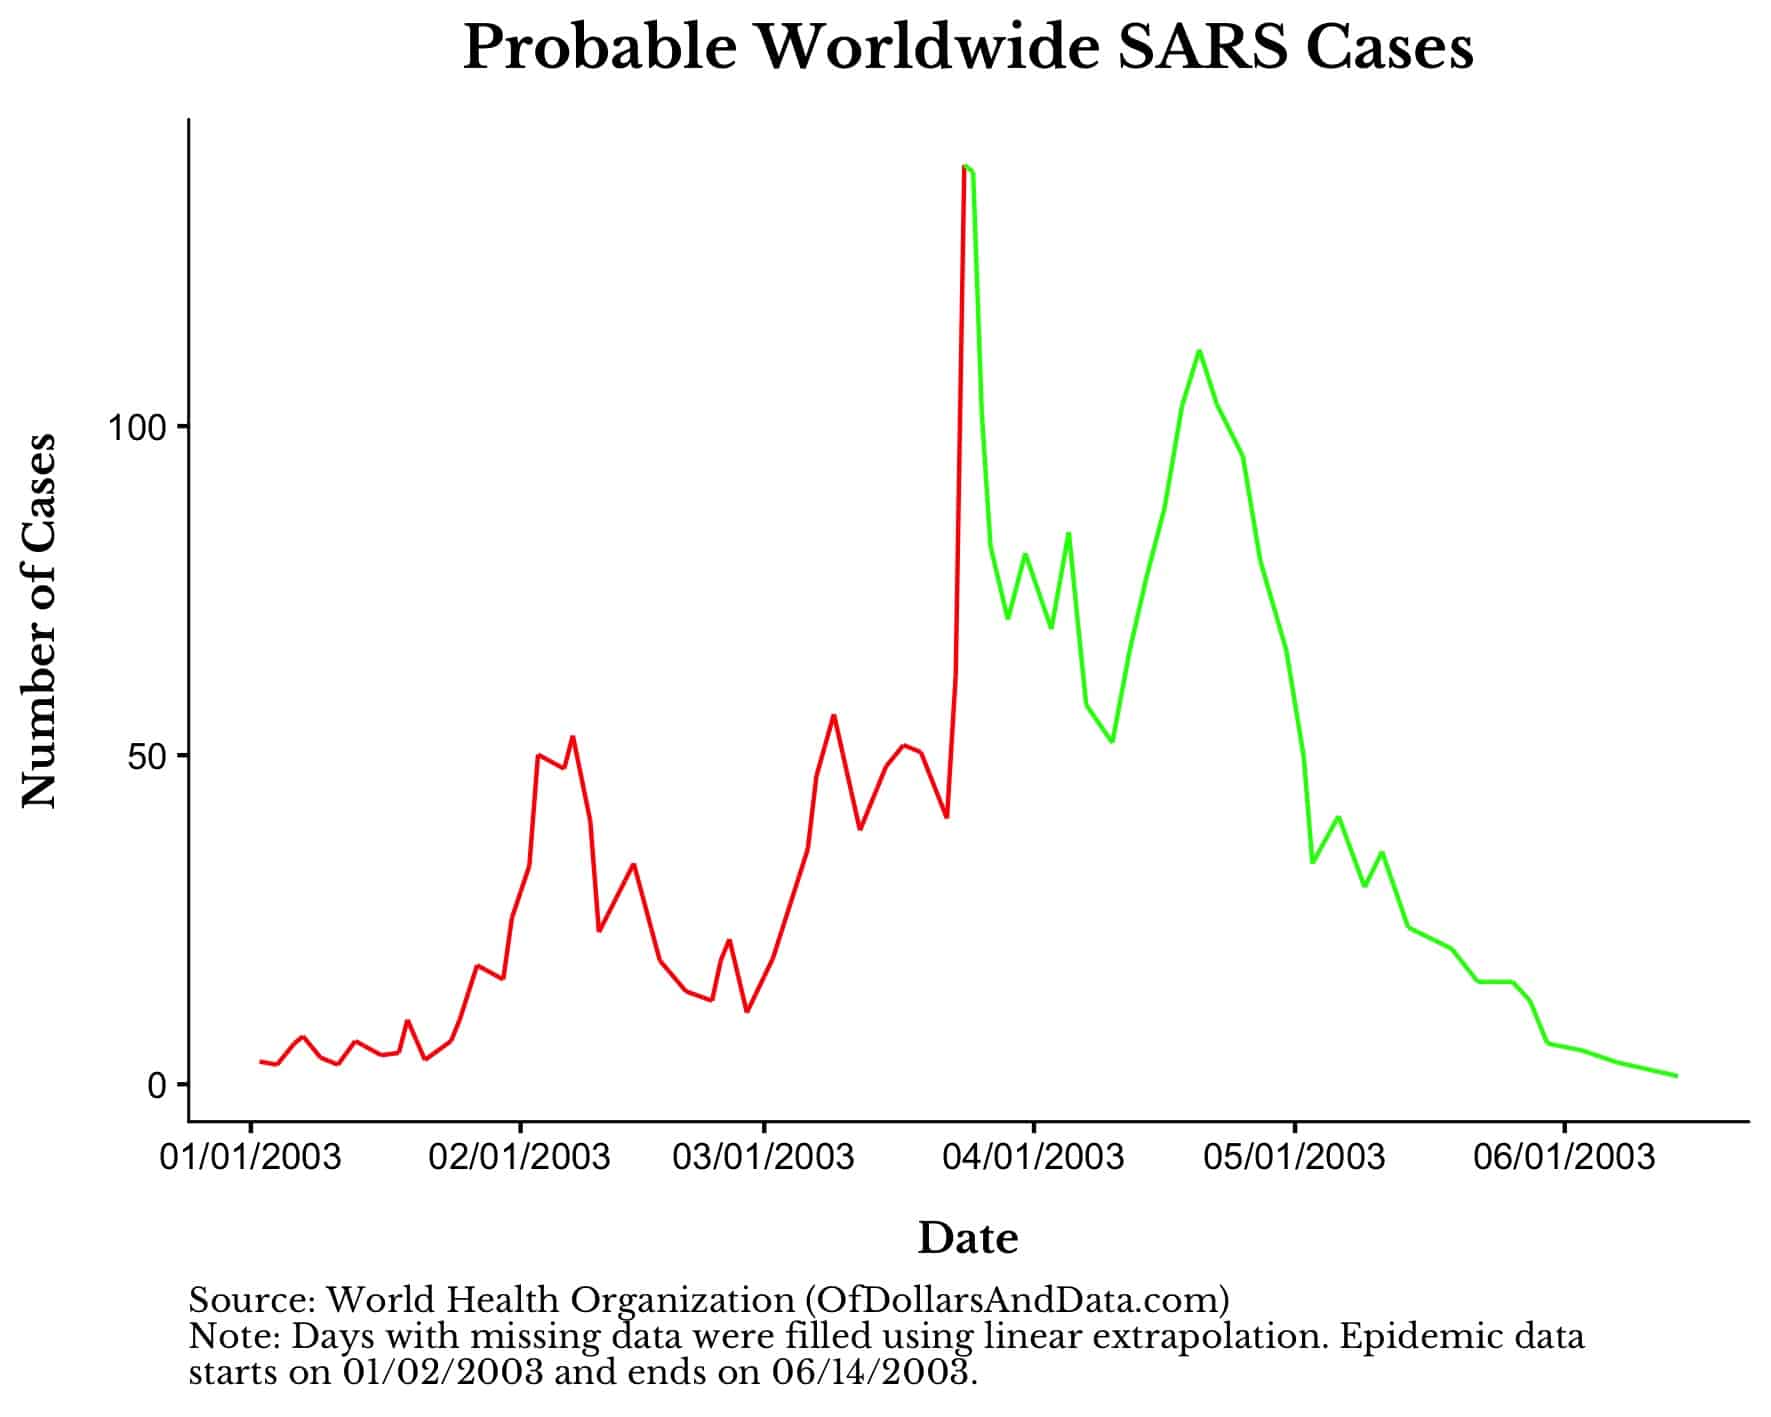 SARS cases worldwide in 2003